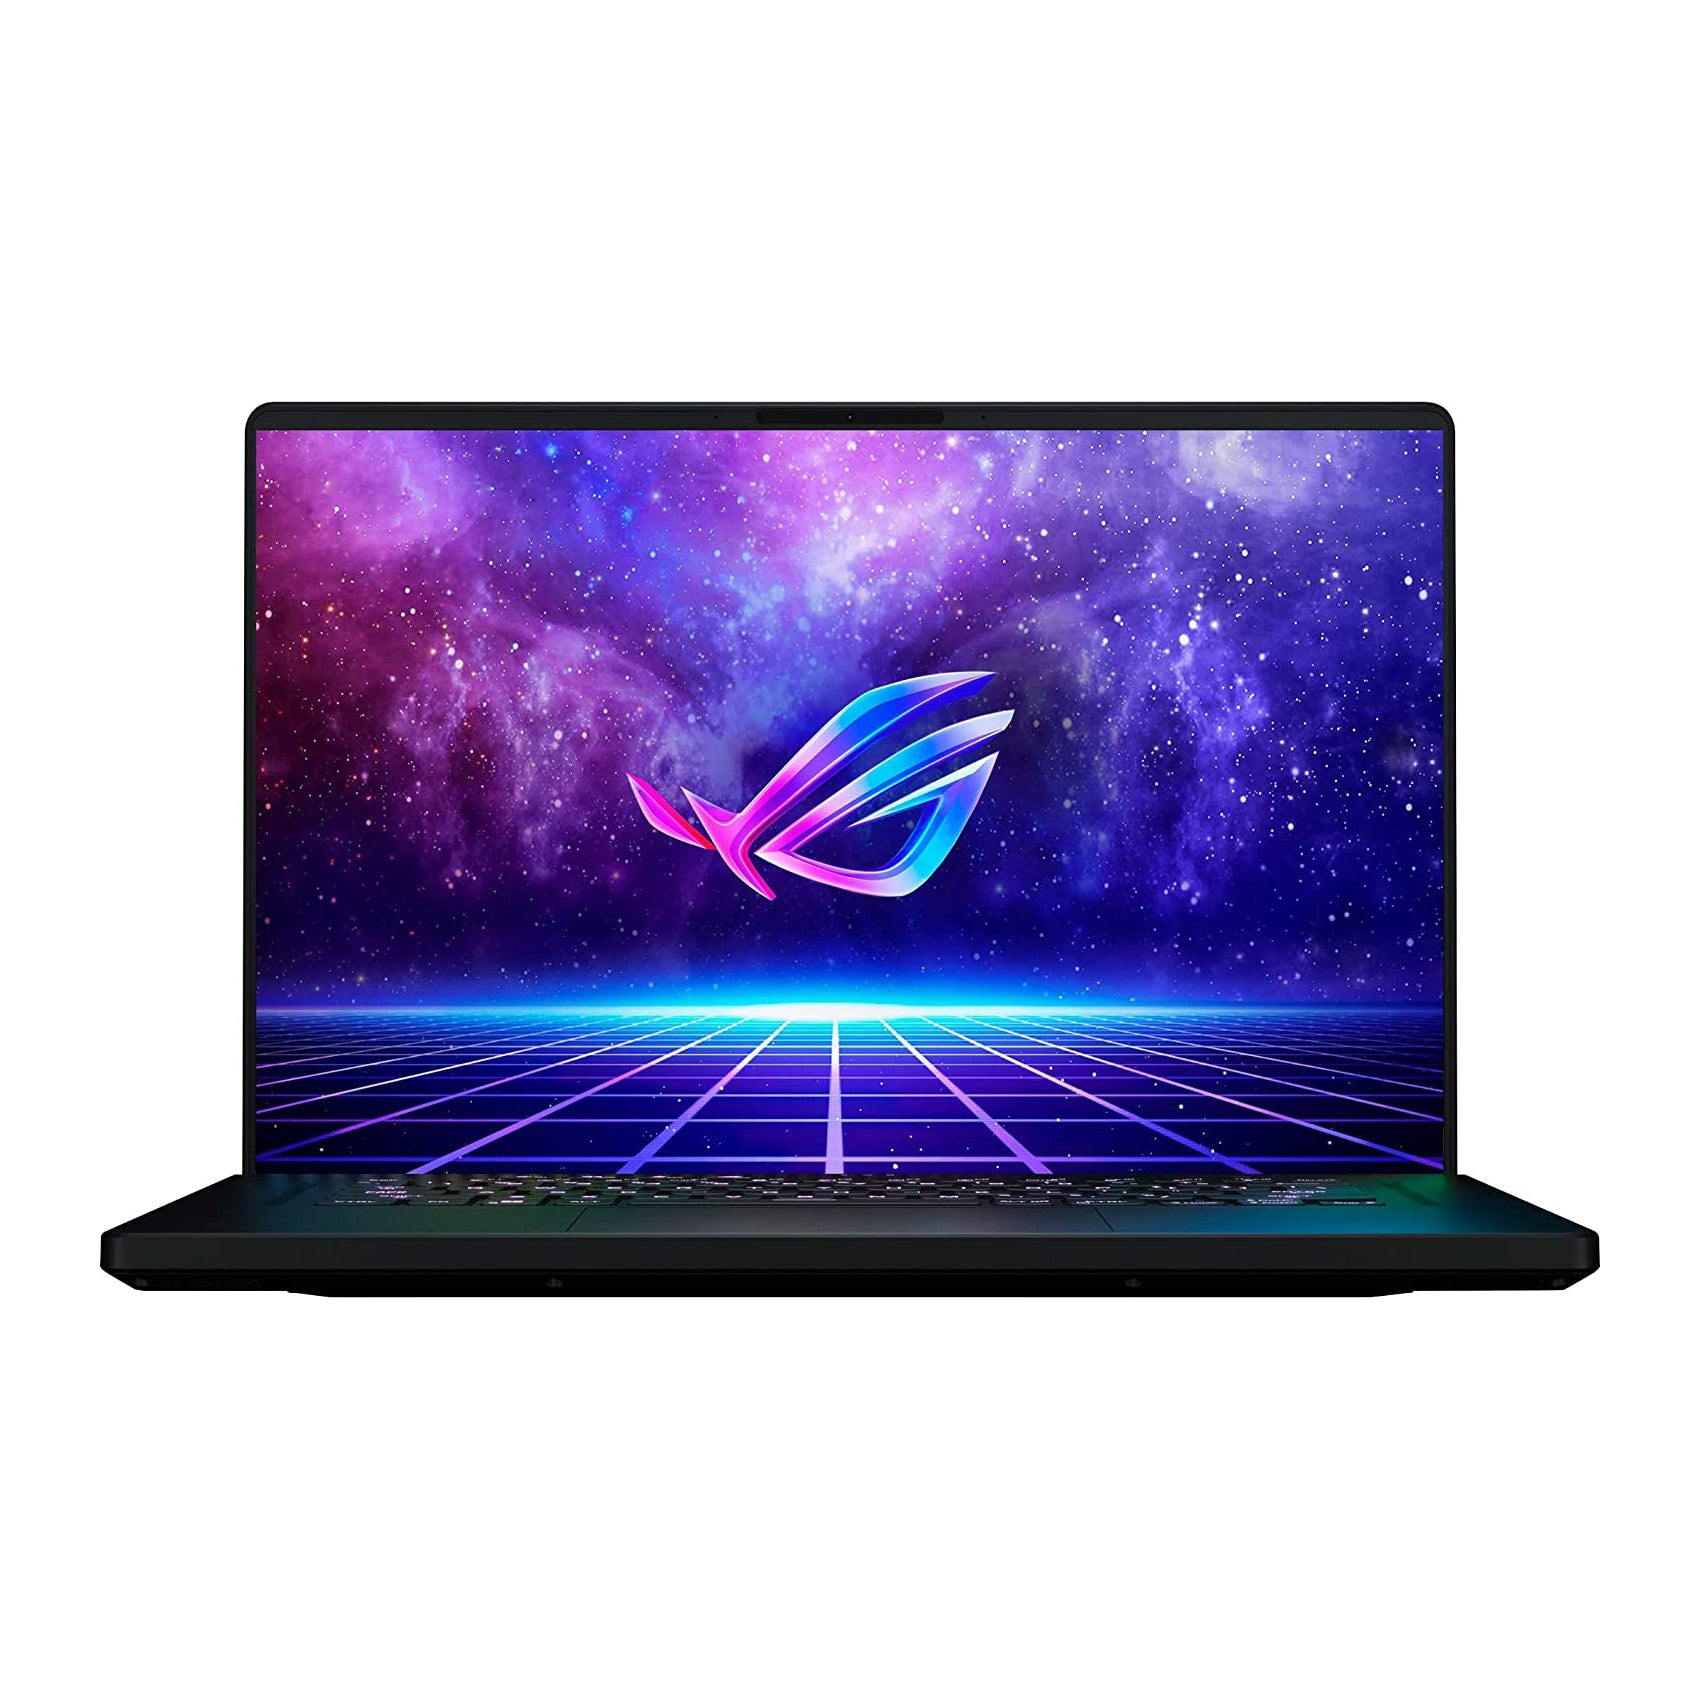 Asus Rog Zephyrus M16 GU603ZW Core i9-12900h Rtx 3070 Ti 165hz Qhd+ Gaming Laptop Offers (Brand New), Gaming laptop, Graphic Design laptop, best laptop for gaming, Best laptop for graphic design, computer for sale Lebanon, laptop for video editing in Lebanon, laptop for sale Lebanon, Best graphic design laptop,	Best video editing laptop, Best programming laptop, laptop for sale in Lebanon, laptops for sale in Lebanon, laptop for sale in Lebanon, buy computer Lebanon, buy laptop Lebanon.